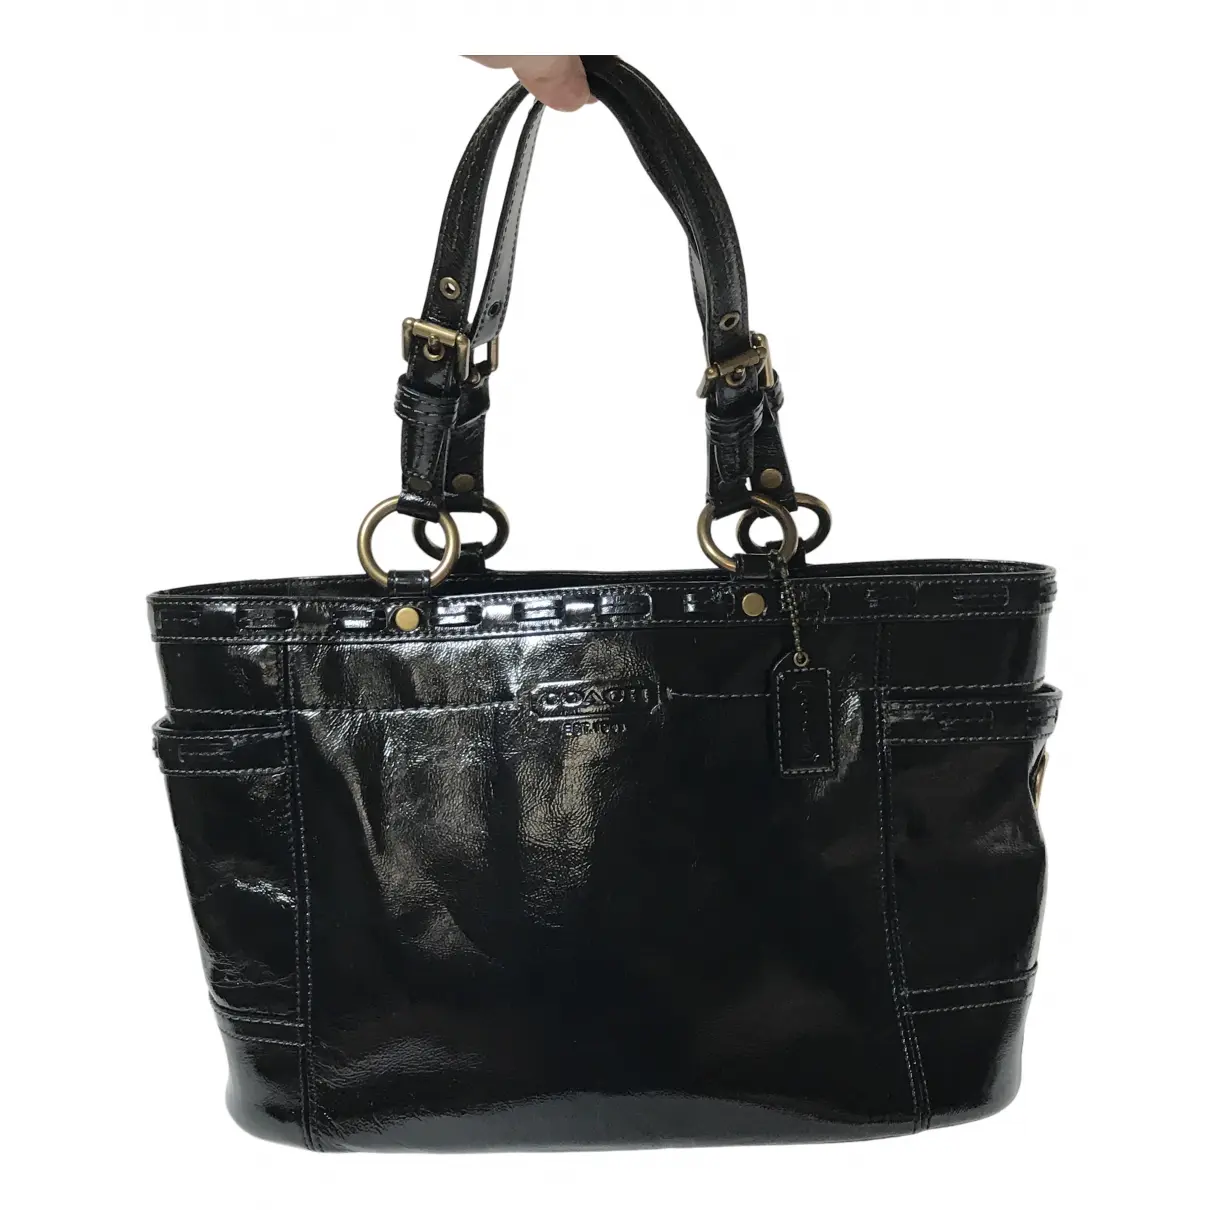 Patent leather tote Coach